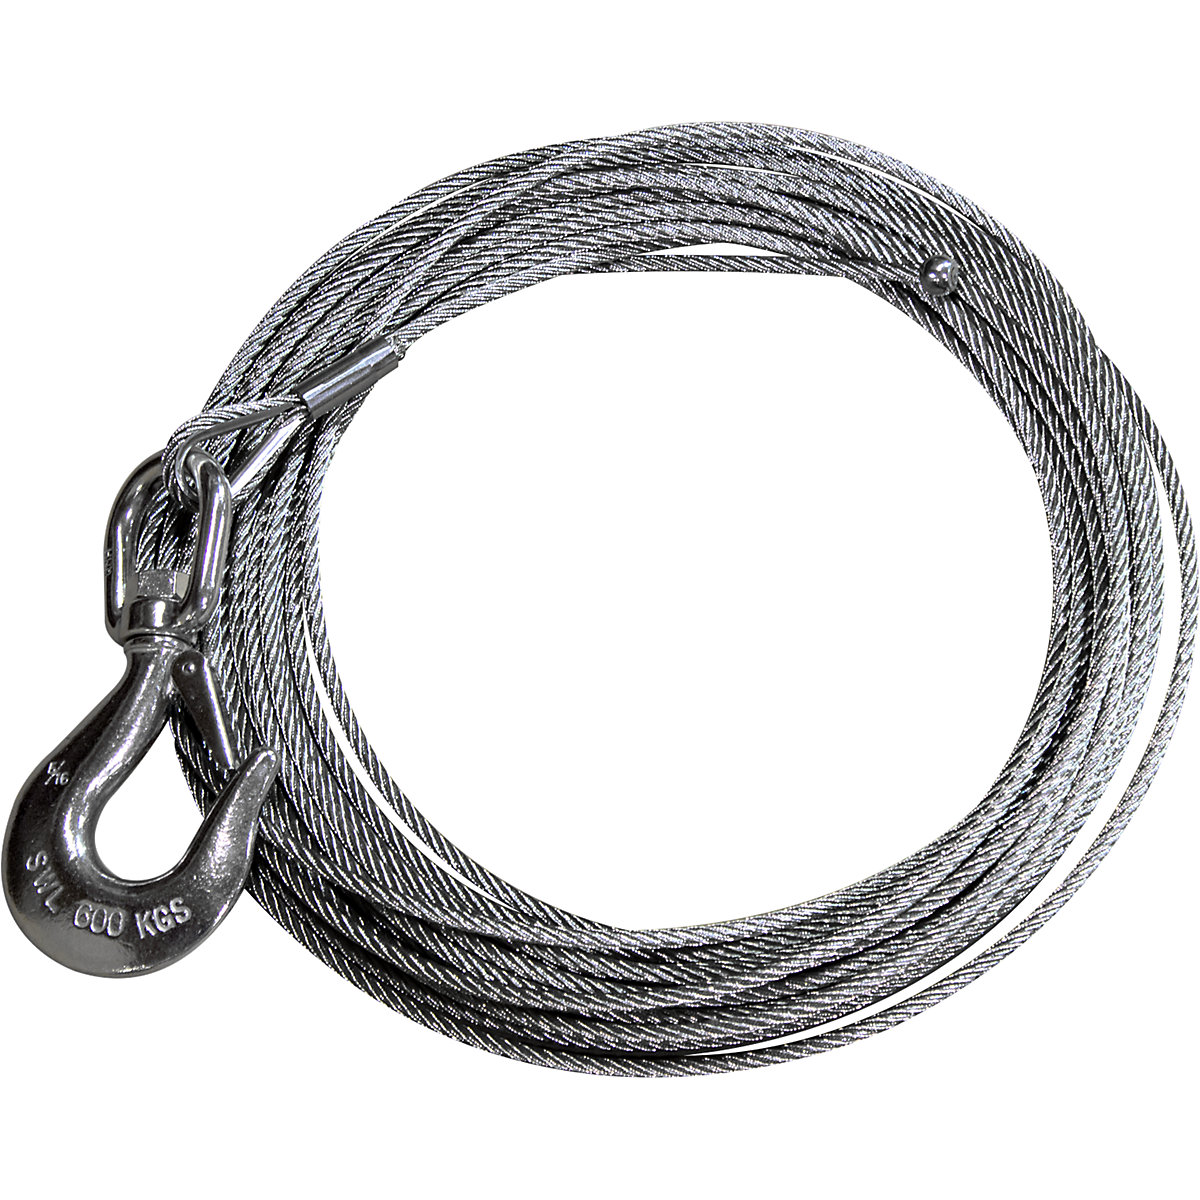 Stainless steel rope incl. load hooks – Thern